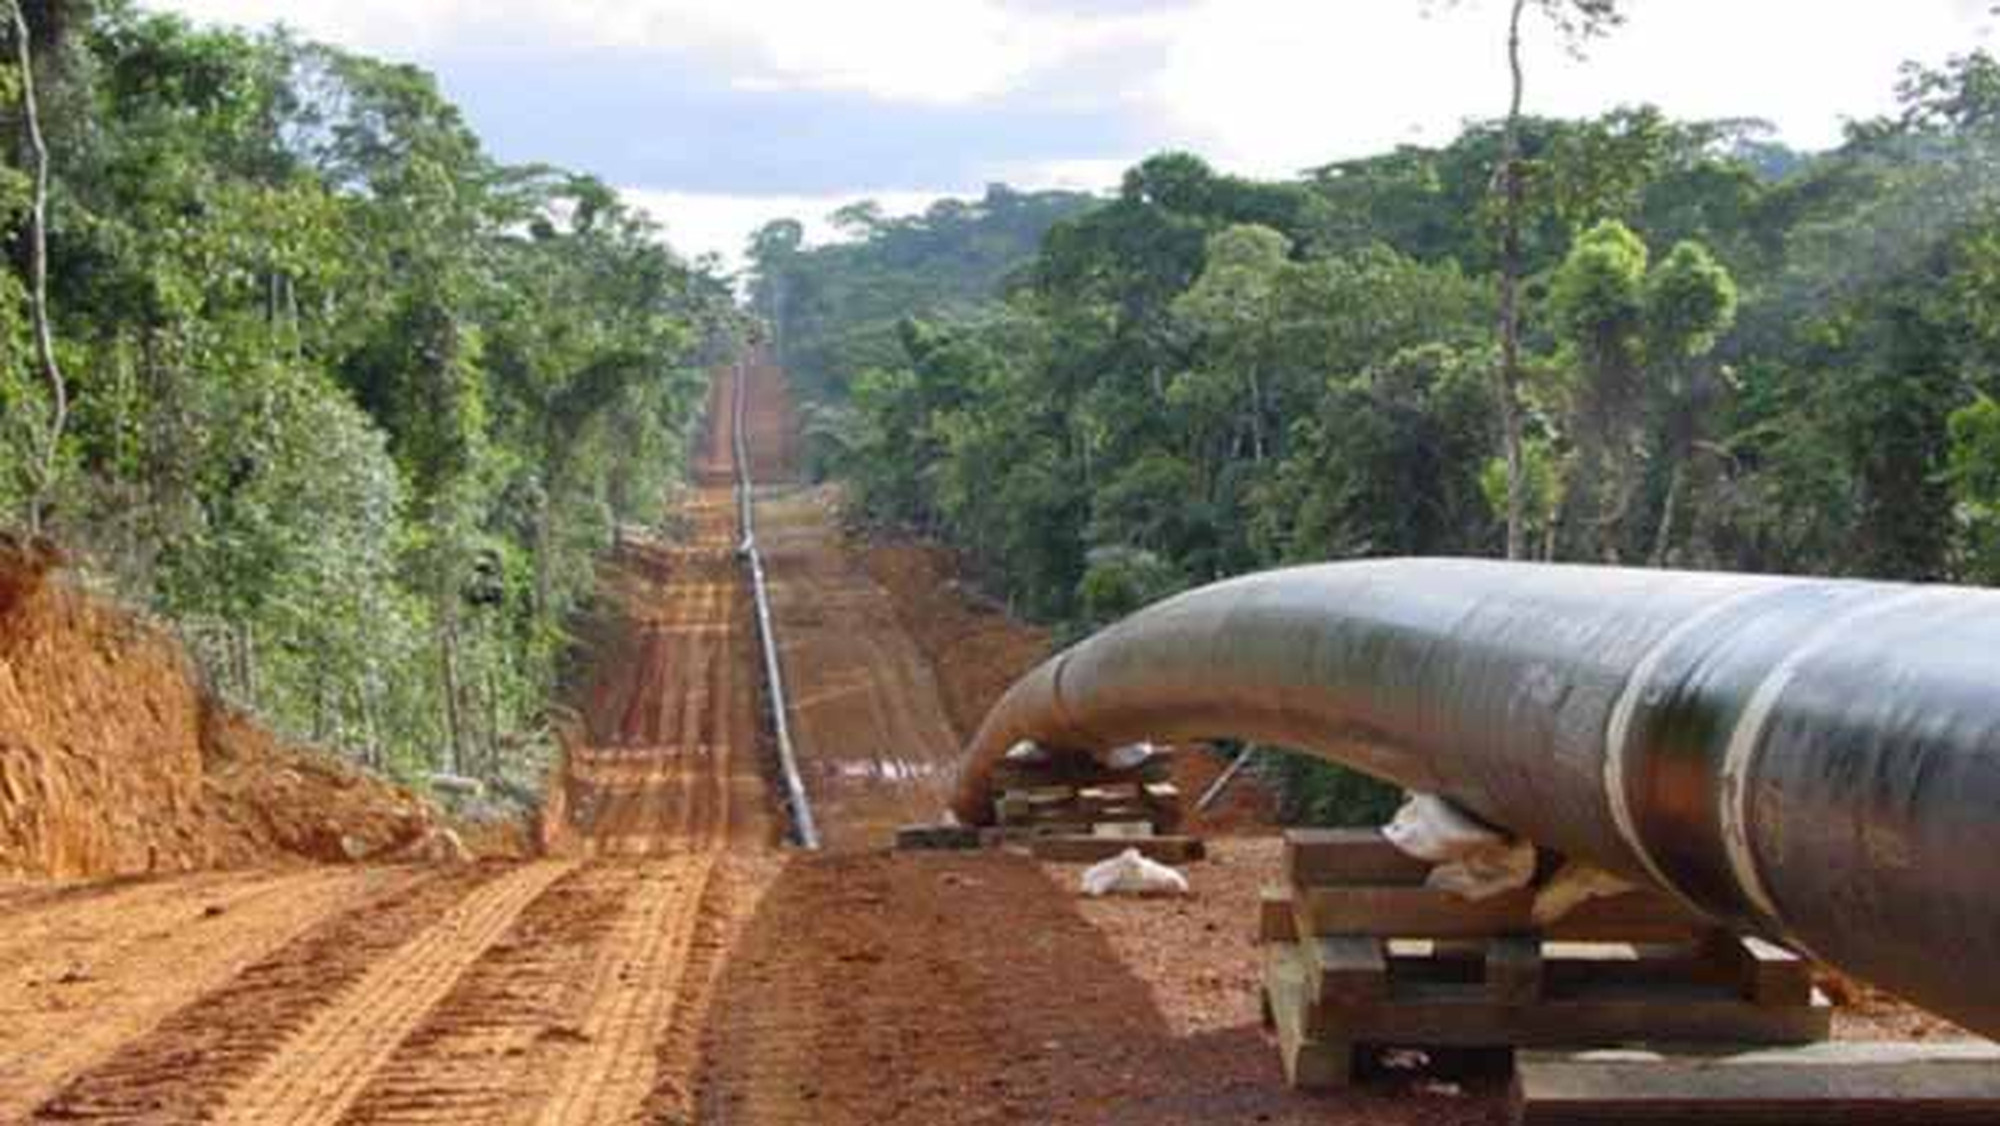 China has stepped in to bankroll the controversial East African Crude Oil Pipeline (EACOP) project. Photo: Handout